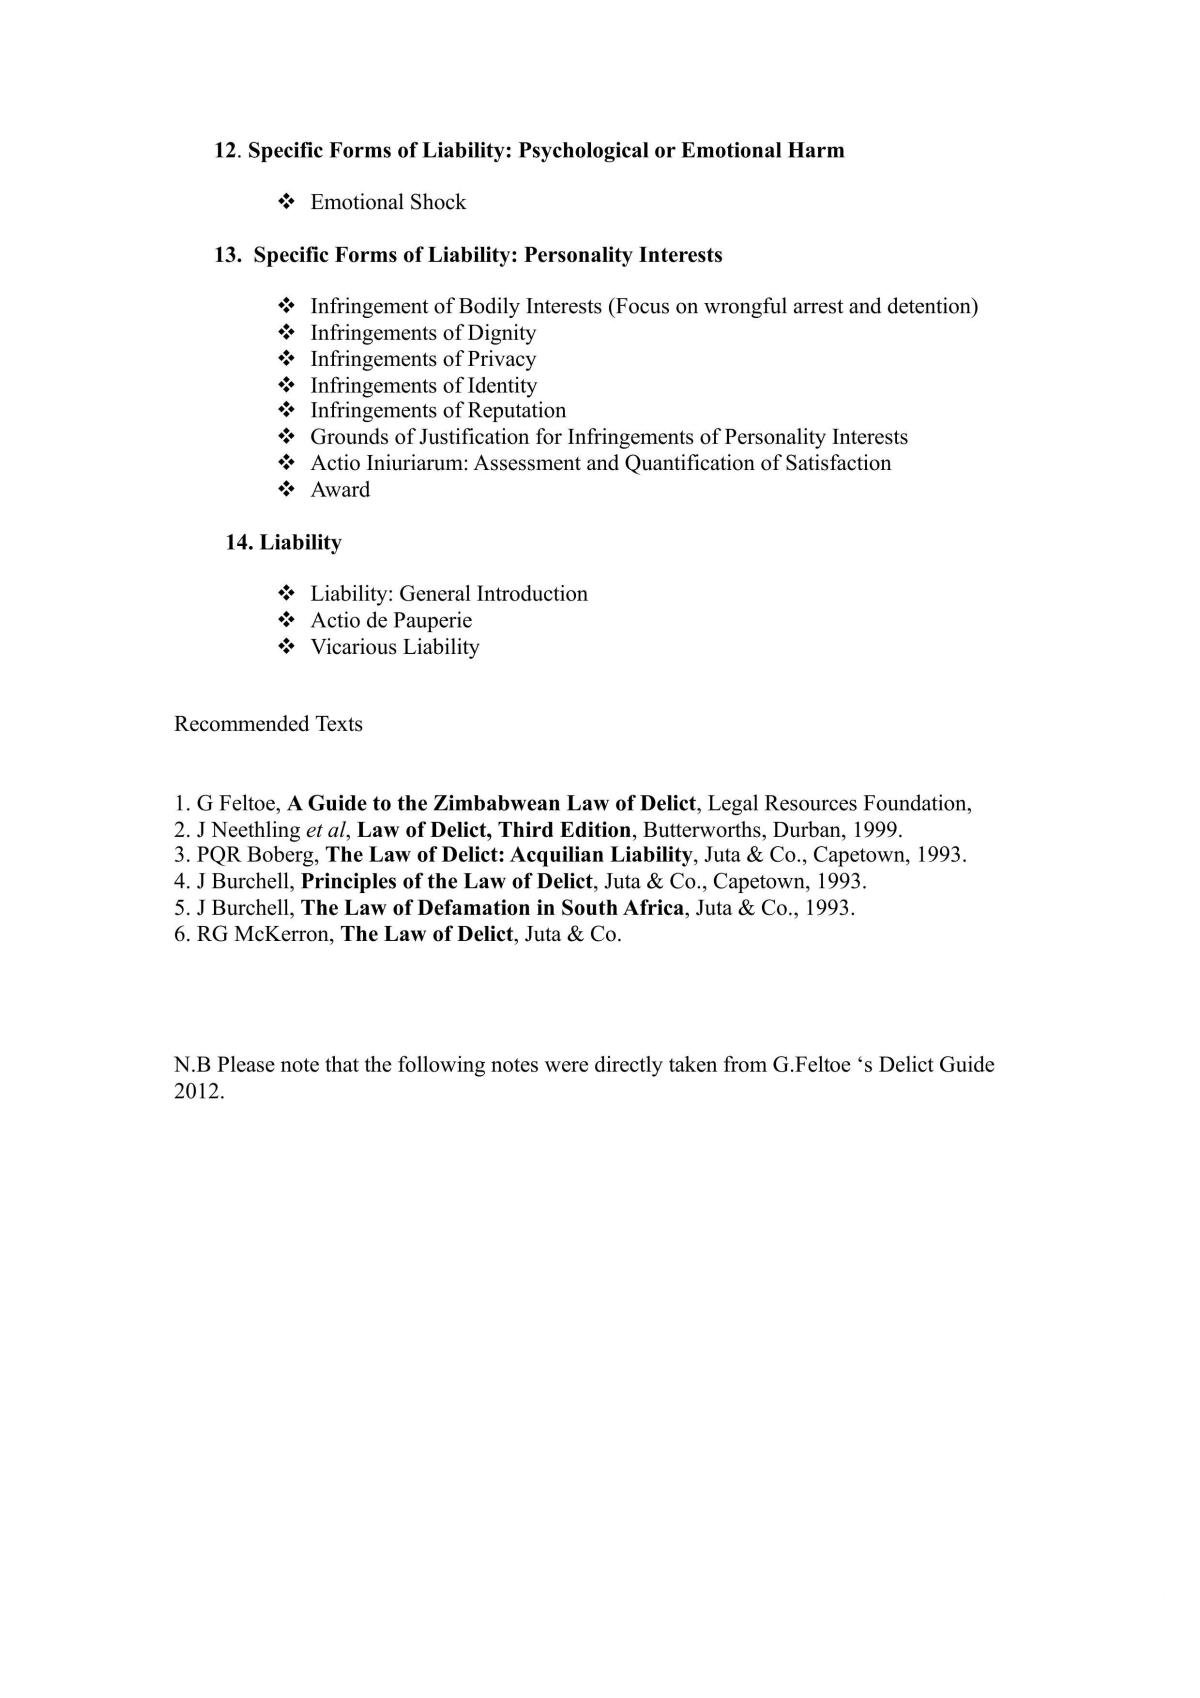 Law of Delict Complete Course Notes - Page 3